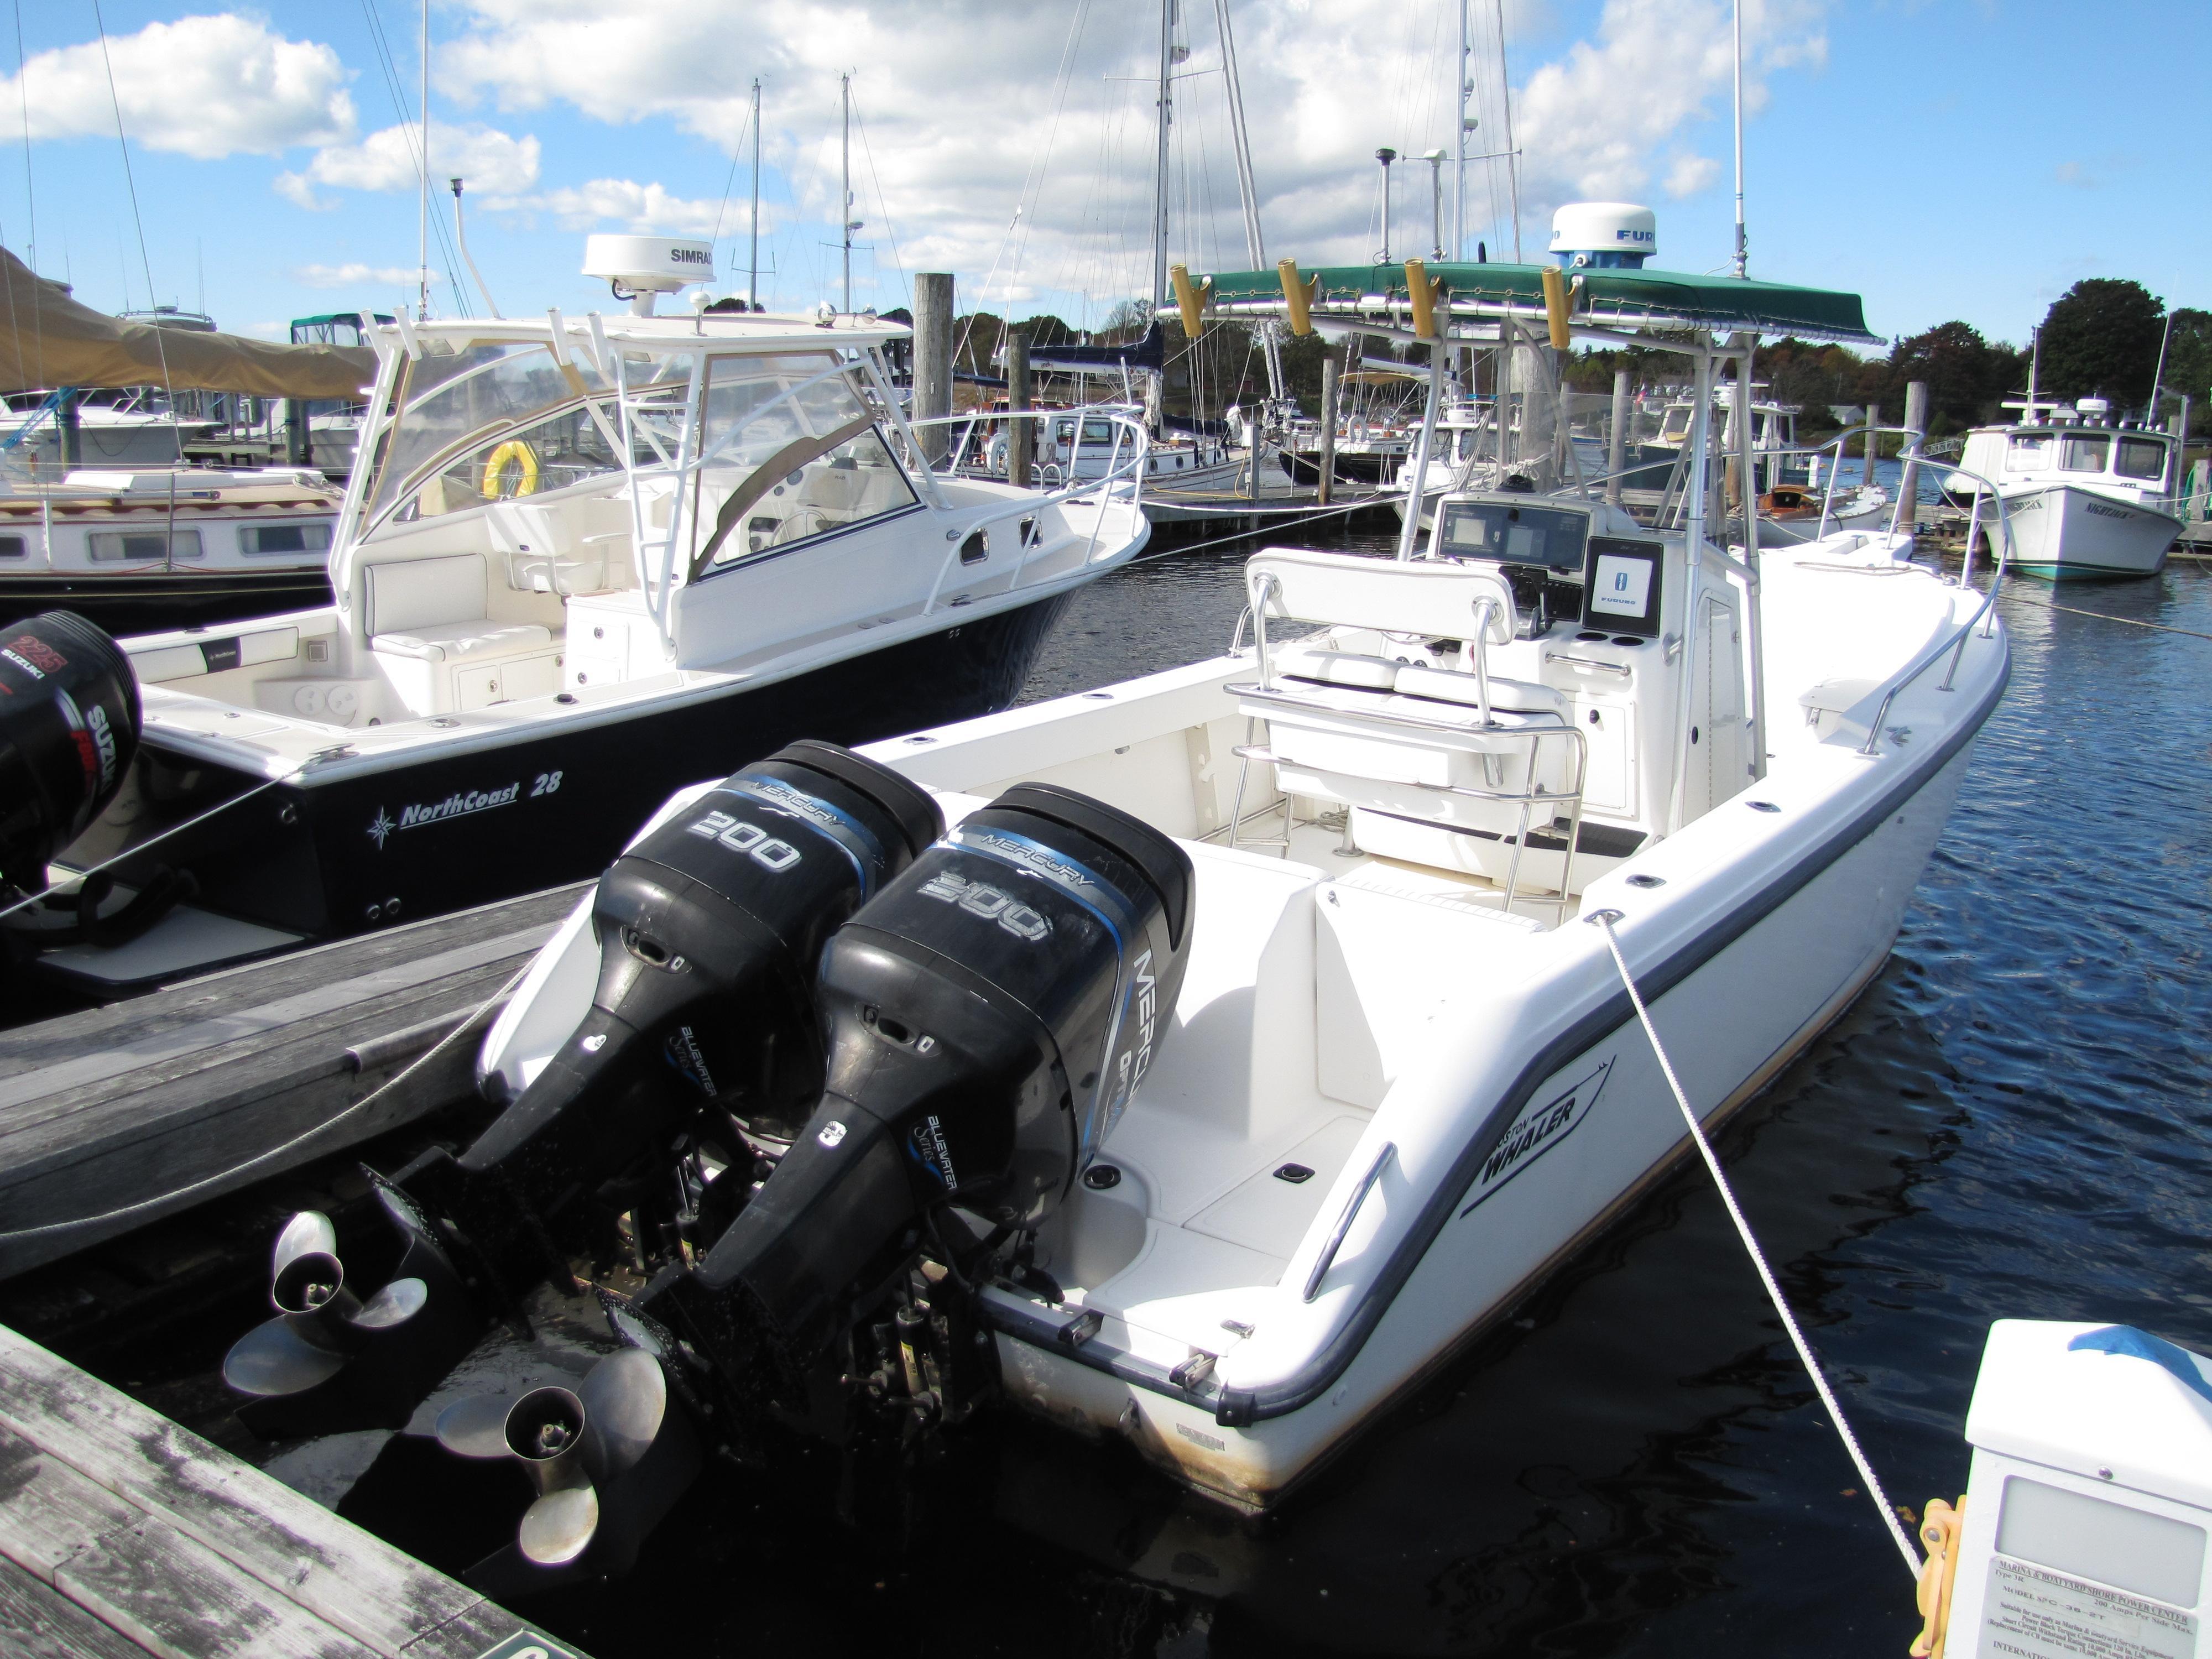 Boston Whaler OUTRAGE, Watch Hill